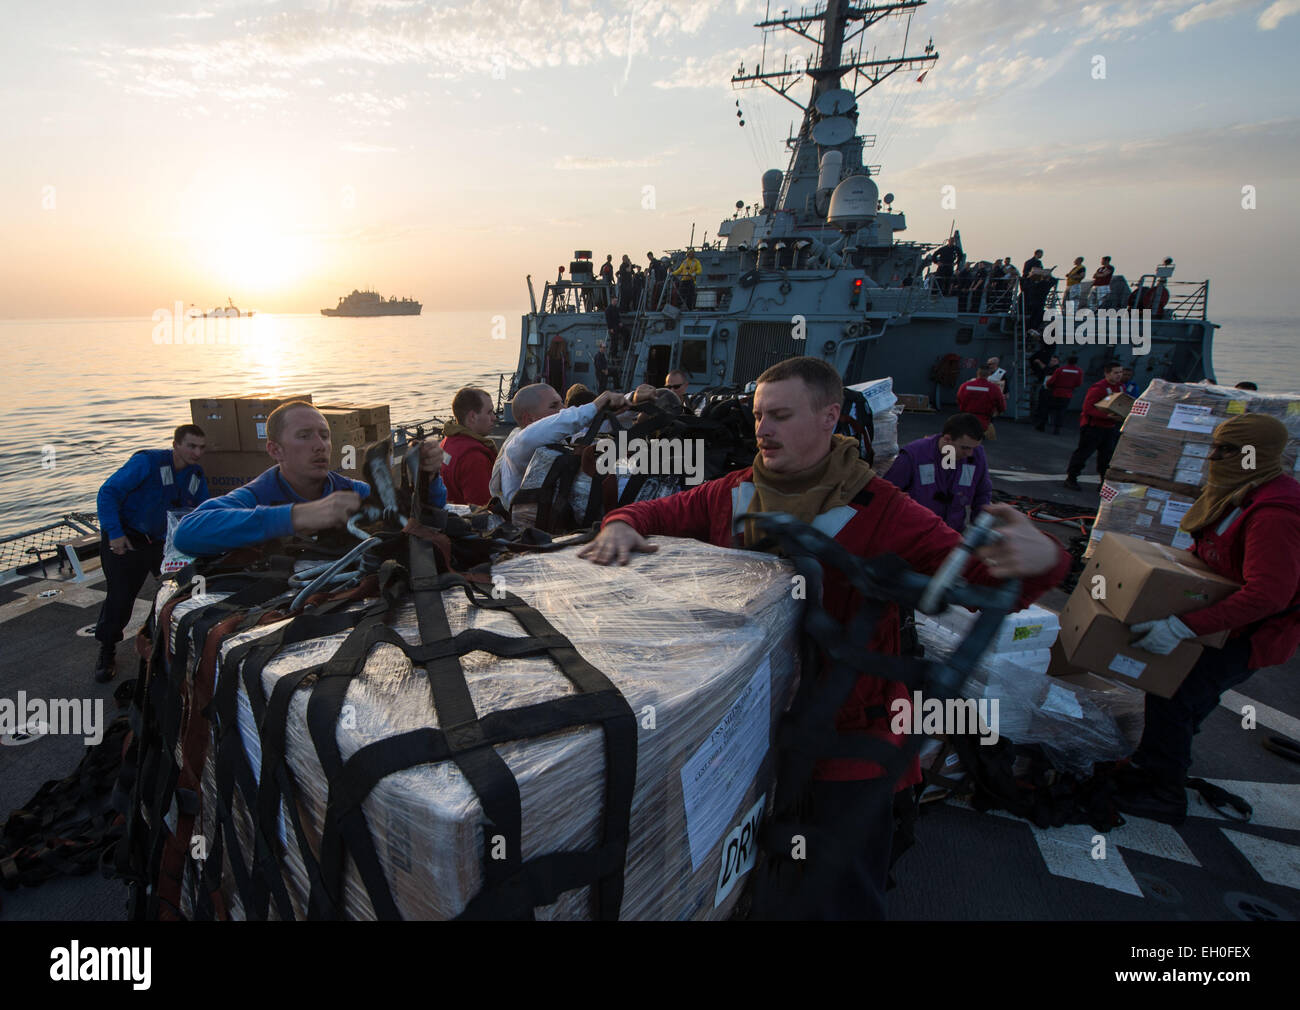 ARABIAN GULF (Feb. 13, 2015) Sailors aboard the guided-missile destroyer USS Mitscher (DDG 57) remove cargo nets from supplies after a vertical replenishment with the Military Sealift Command dry cargo and ammunition ship USNS Charles Drew (T-AKE 10) as an SA-330J Puma helicopter flies supplies to the USS Milius (DDG 69), background, left. Mitscher is deployed in the U.S. 5th Fleet area of operations supporting Operation Inherent Resolve, strike operations in Iraq and Syria as directed, maritime security operations and theater security cooperation efforts in the region. Stock Photo